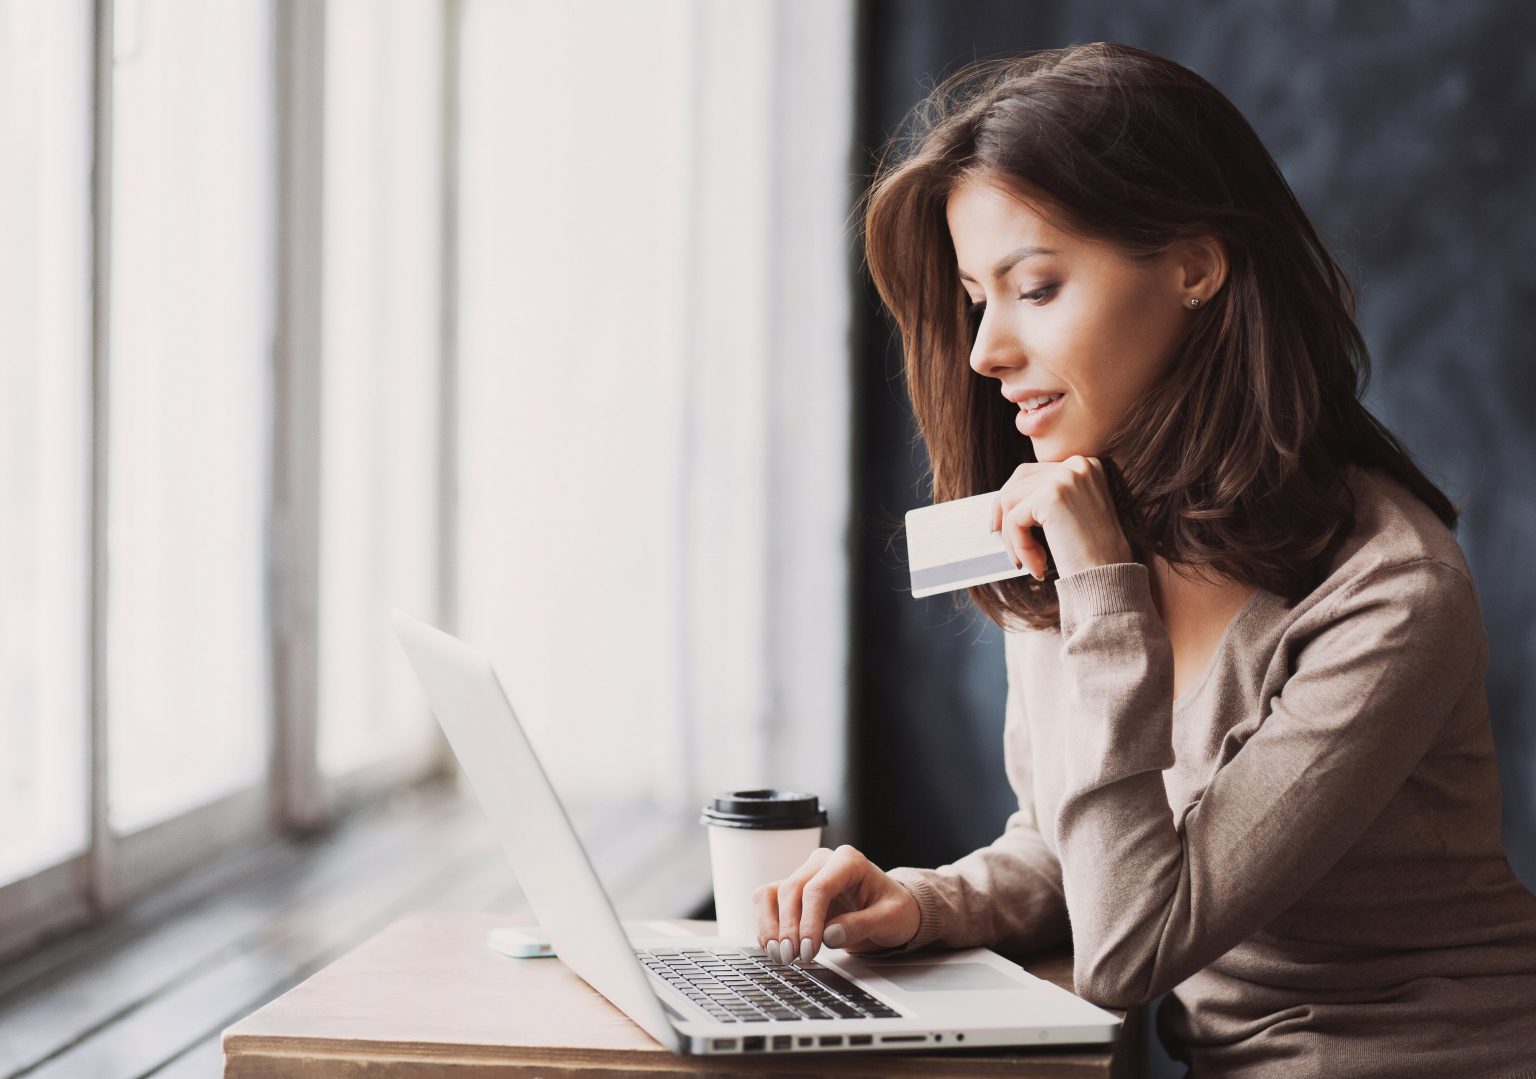 The business credit line options that will take your business to the next level